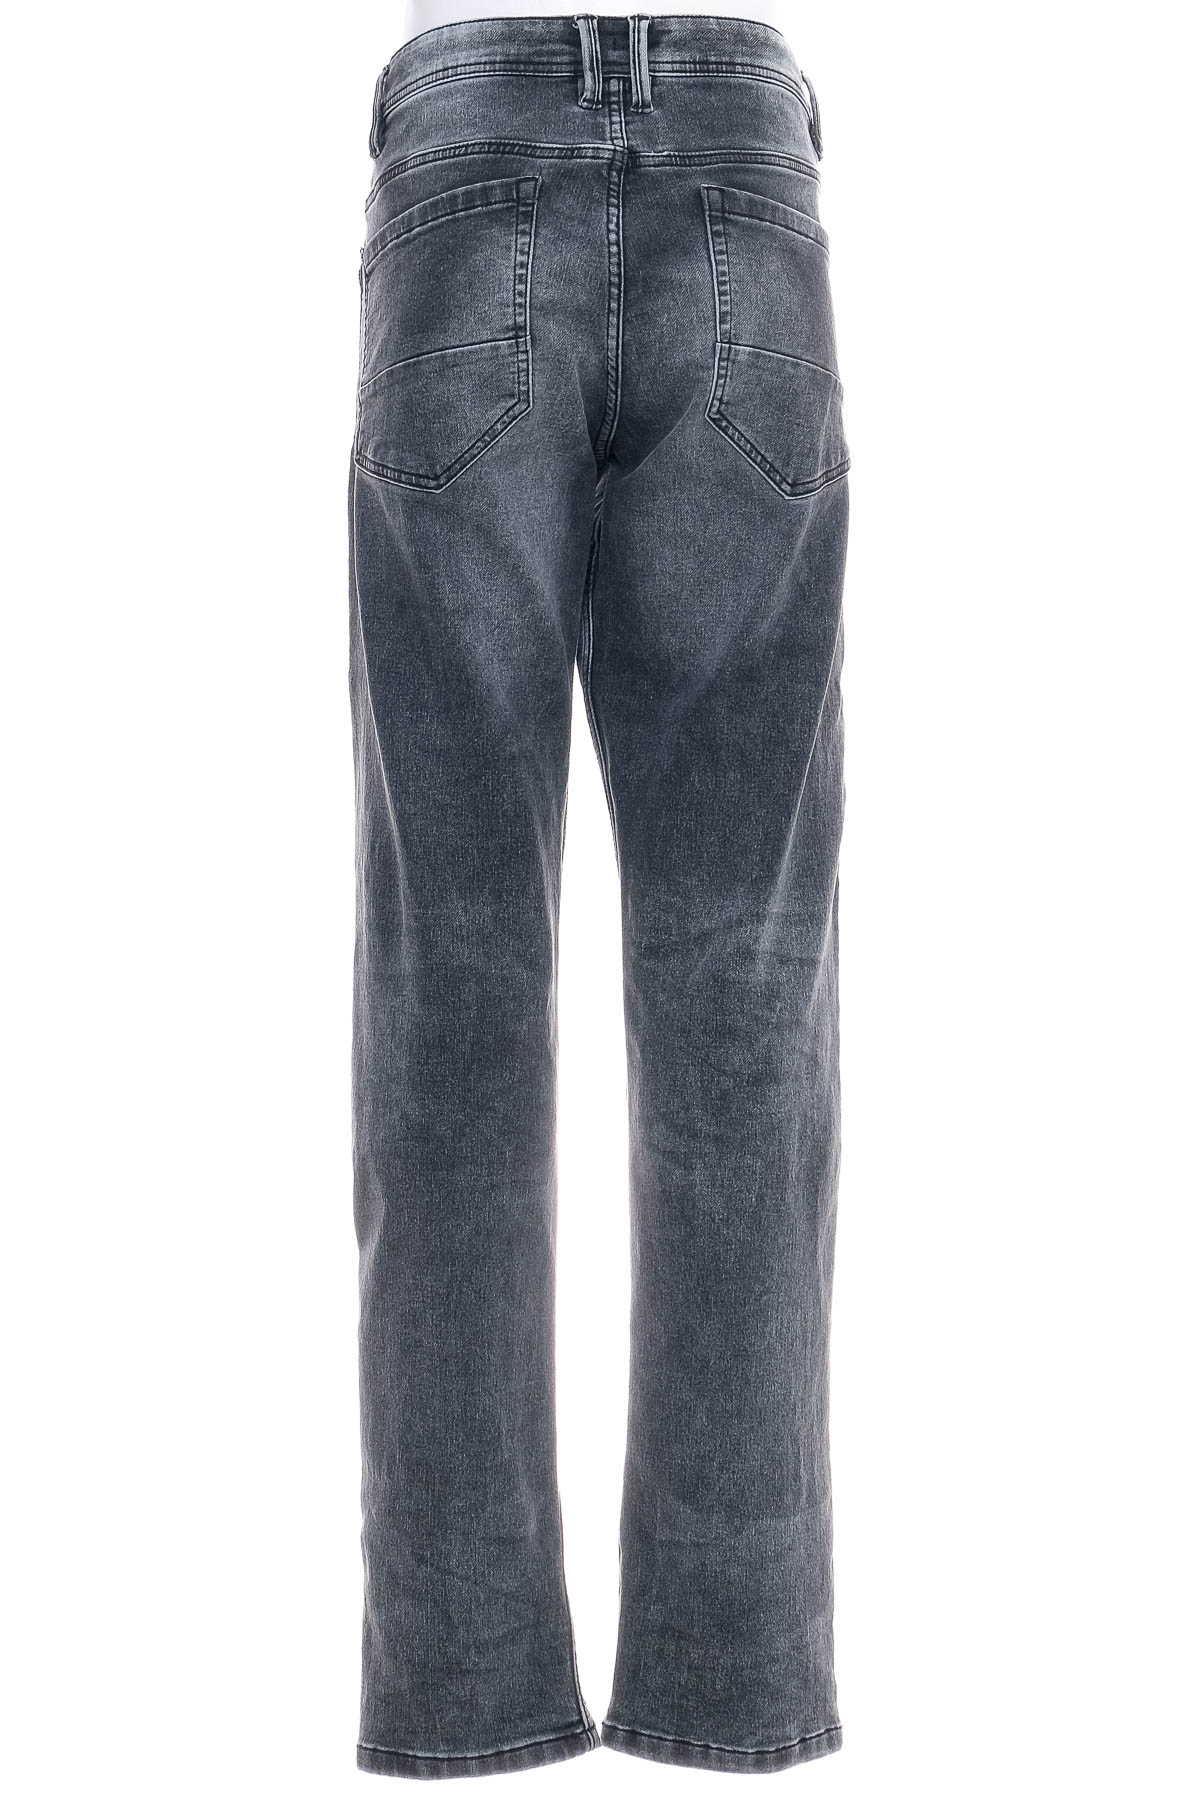 Men's jeans - Straight Up - 1